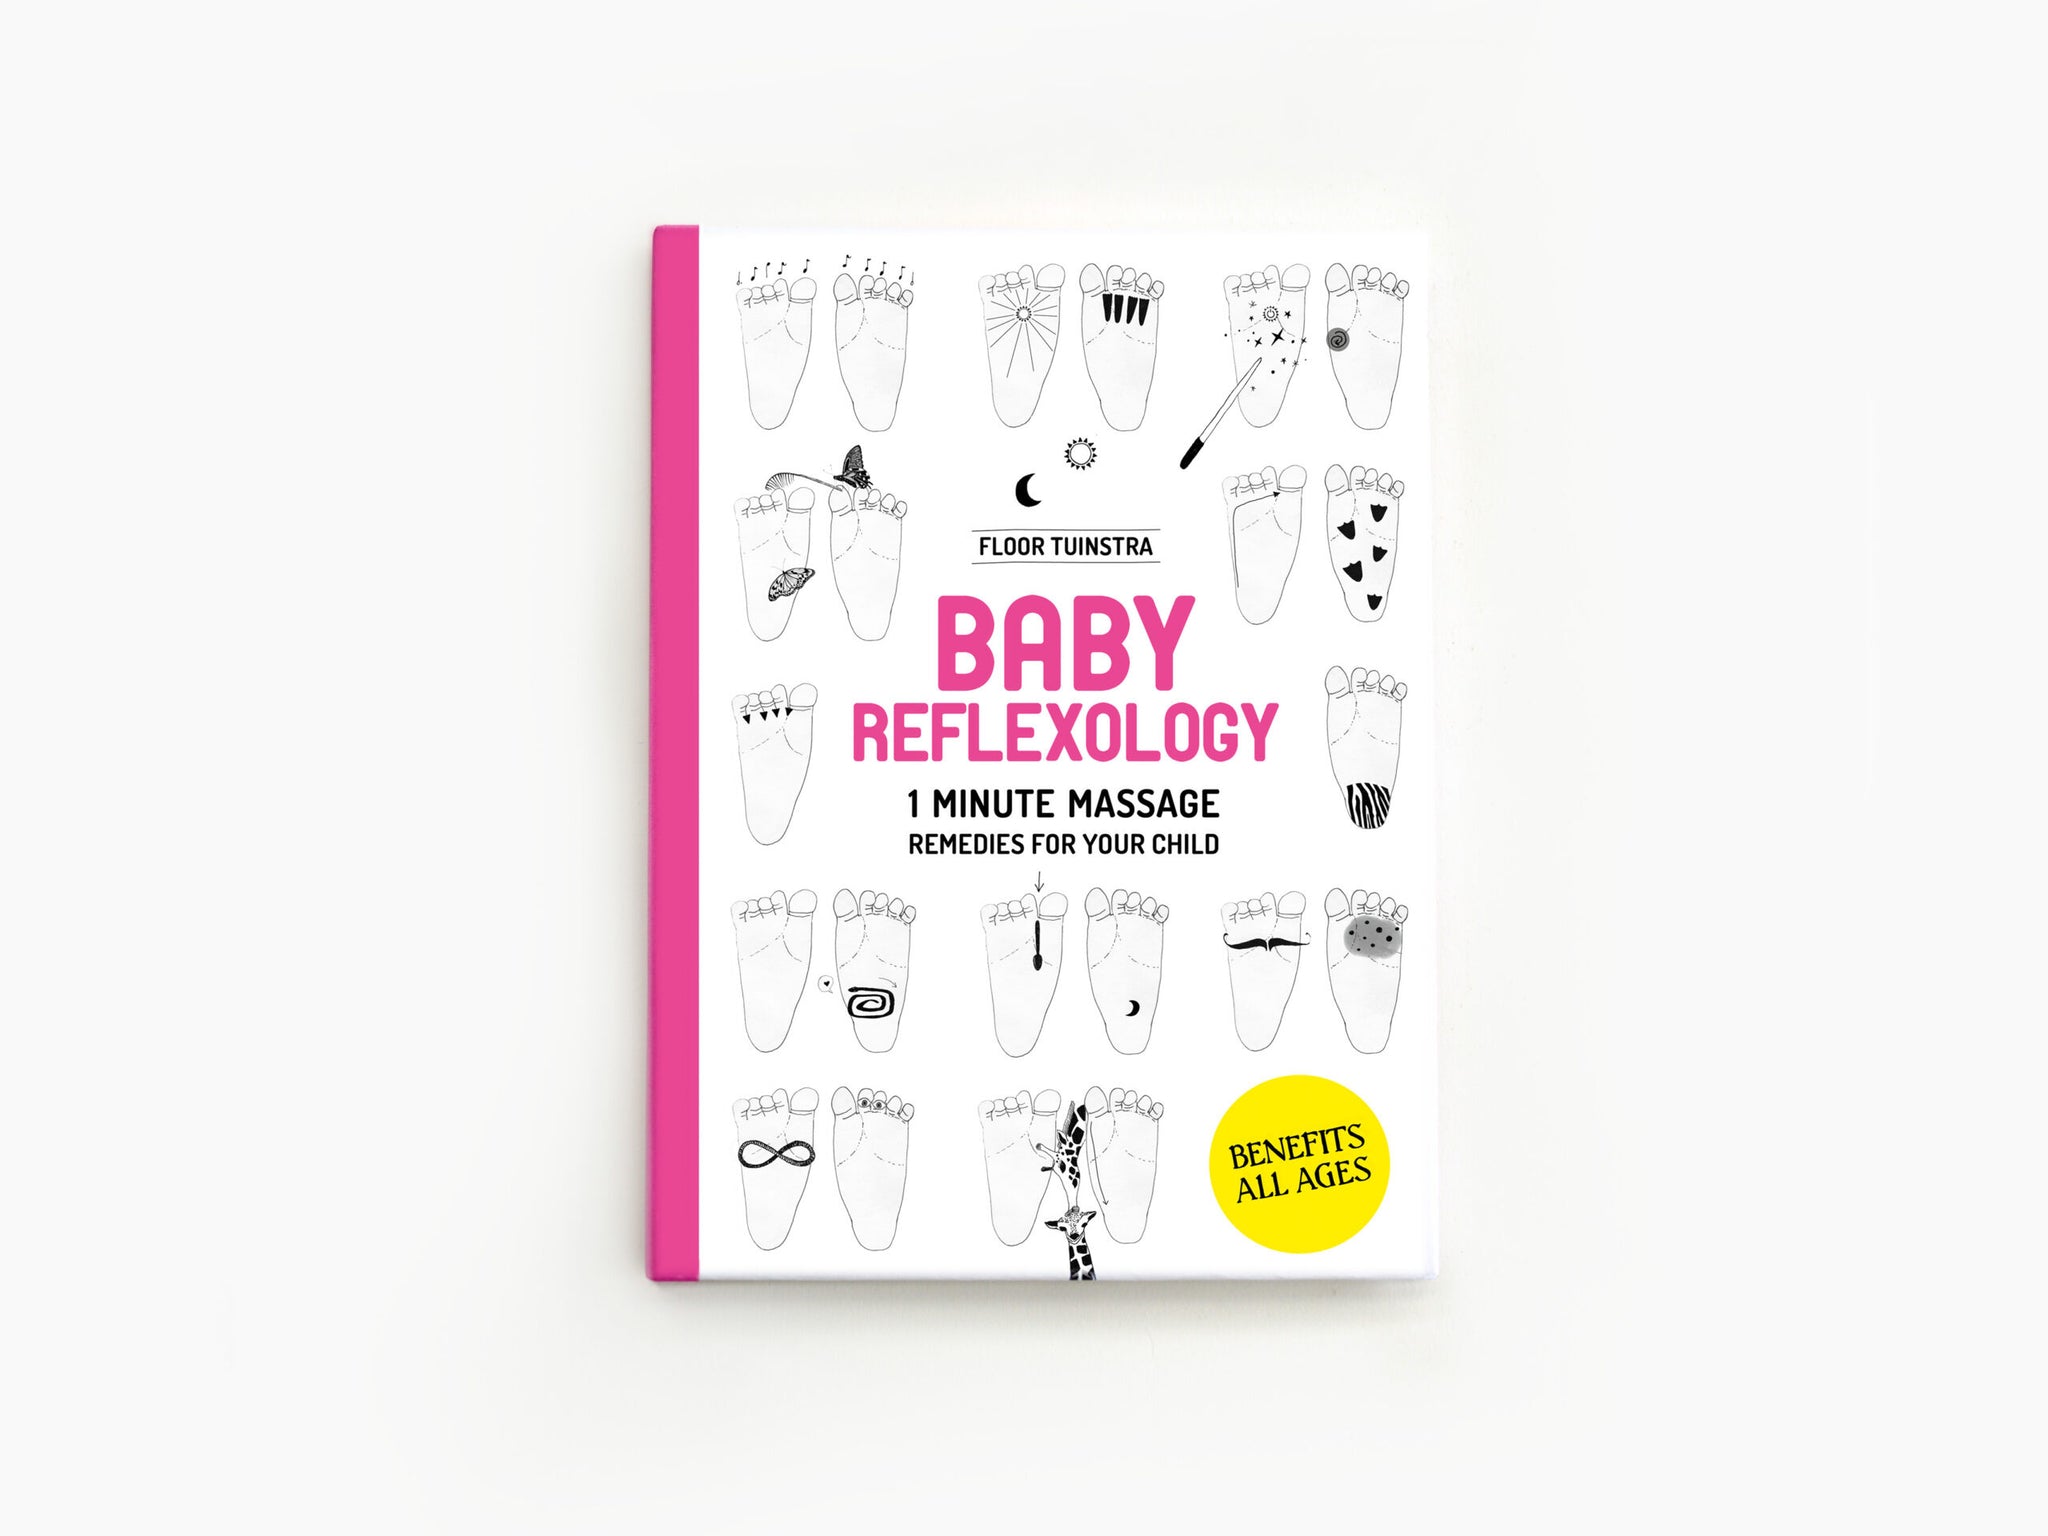 book-baby-reflexology-1-minute-massage-remedies-for-your-child